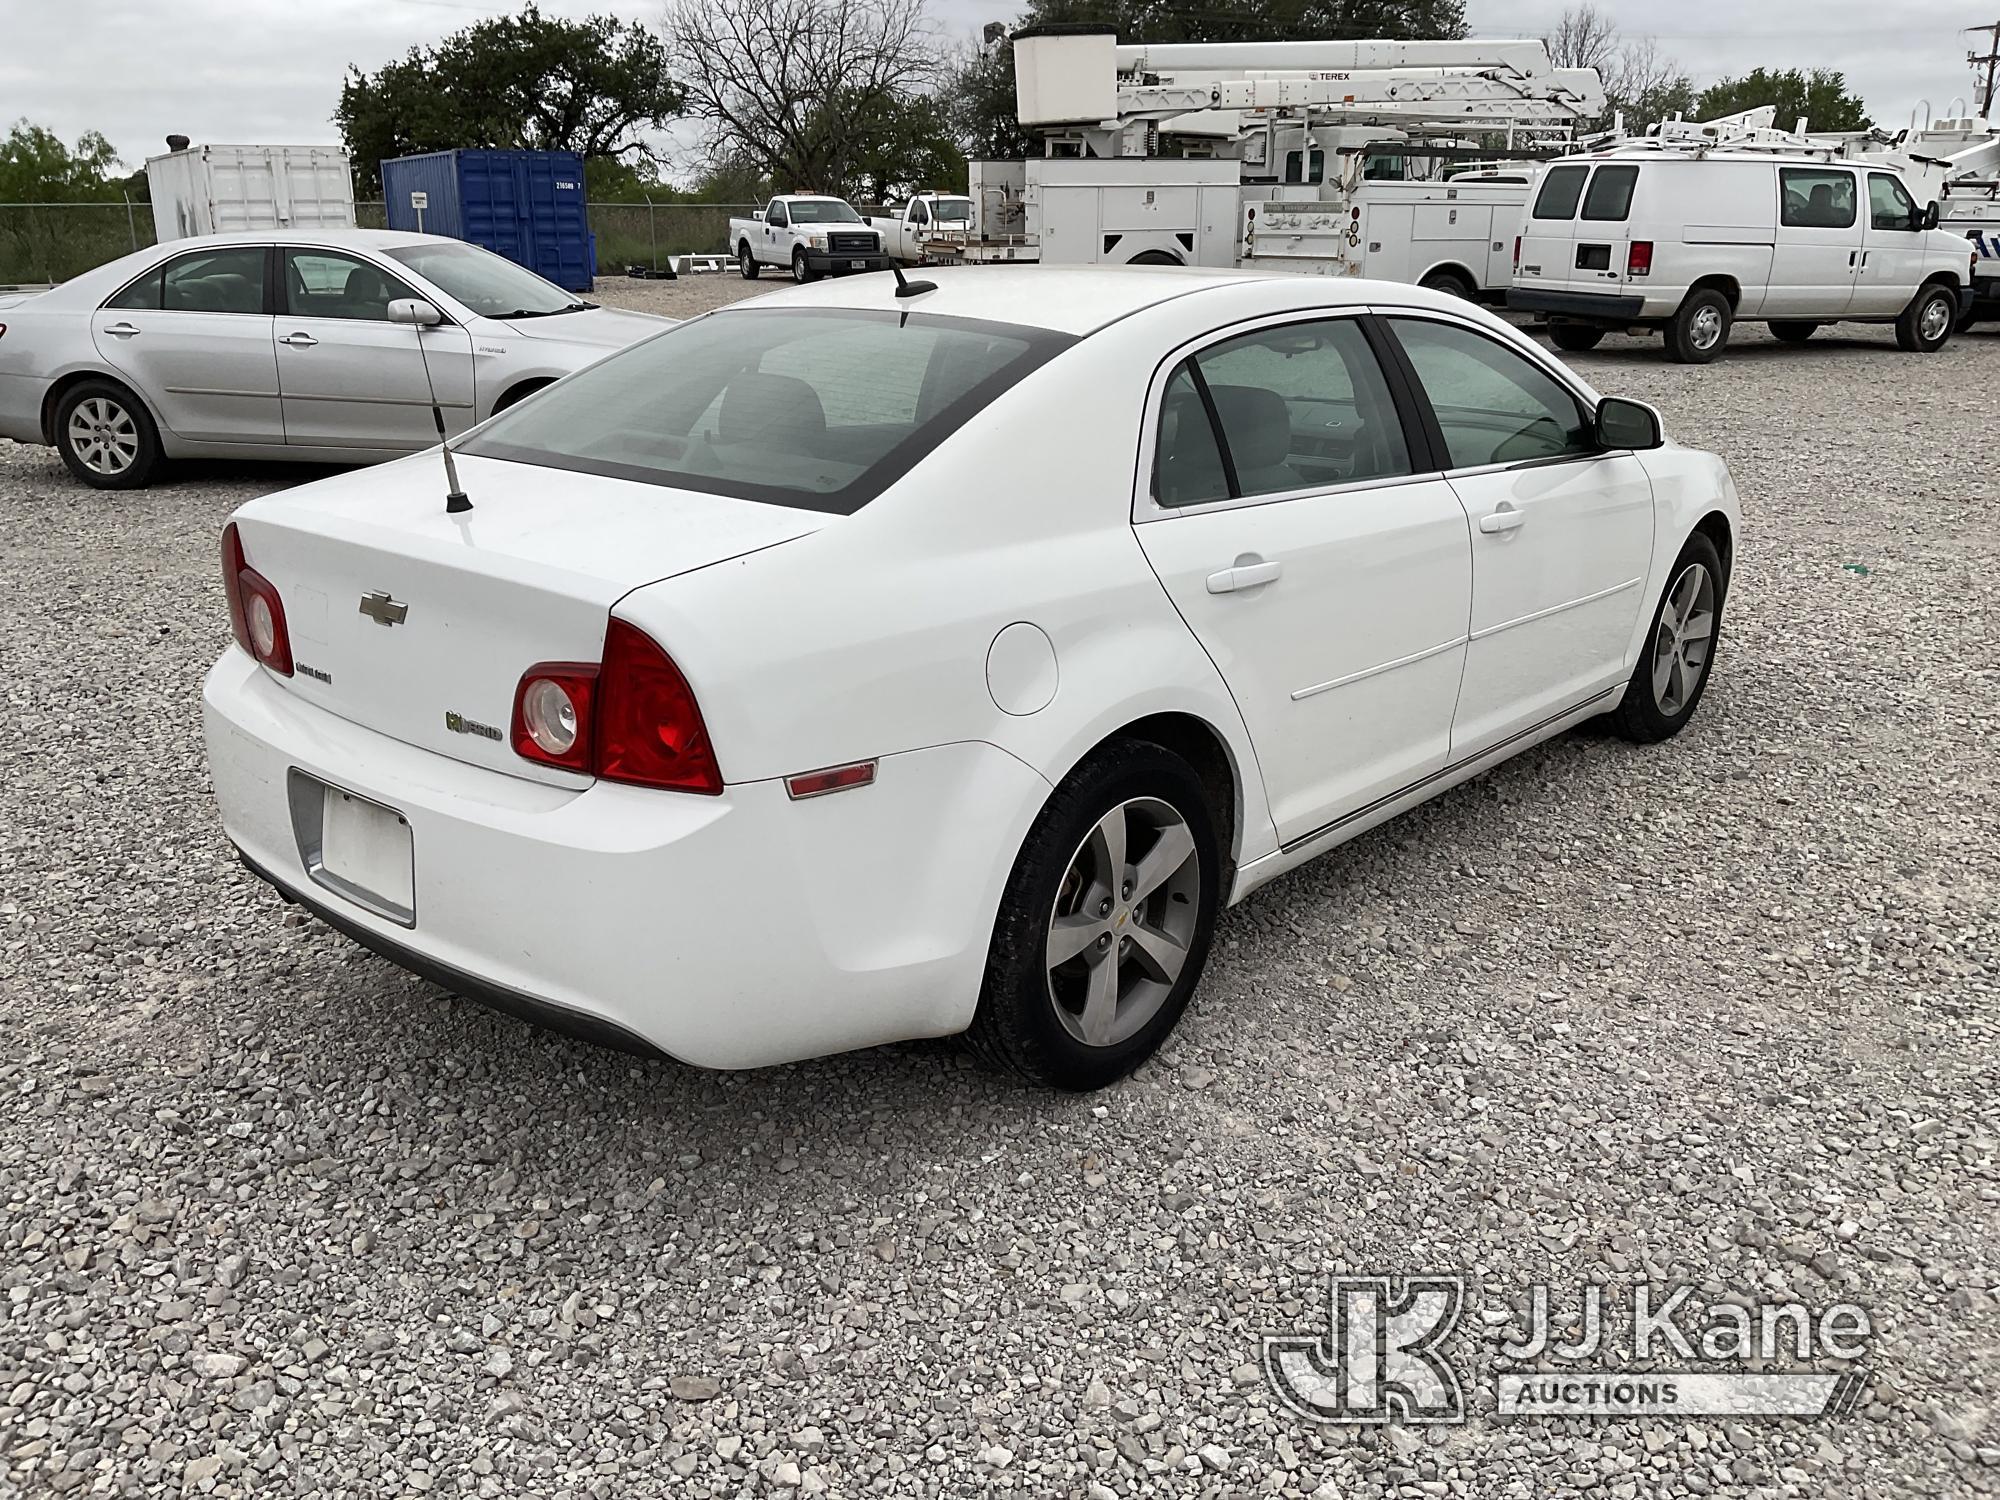 (Johnson City, TX) 2009 Chevrolet Malibu Hybrid Vehicle, , Cooperative owned and maintained Runs & M